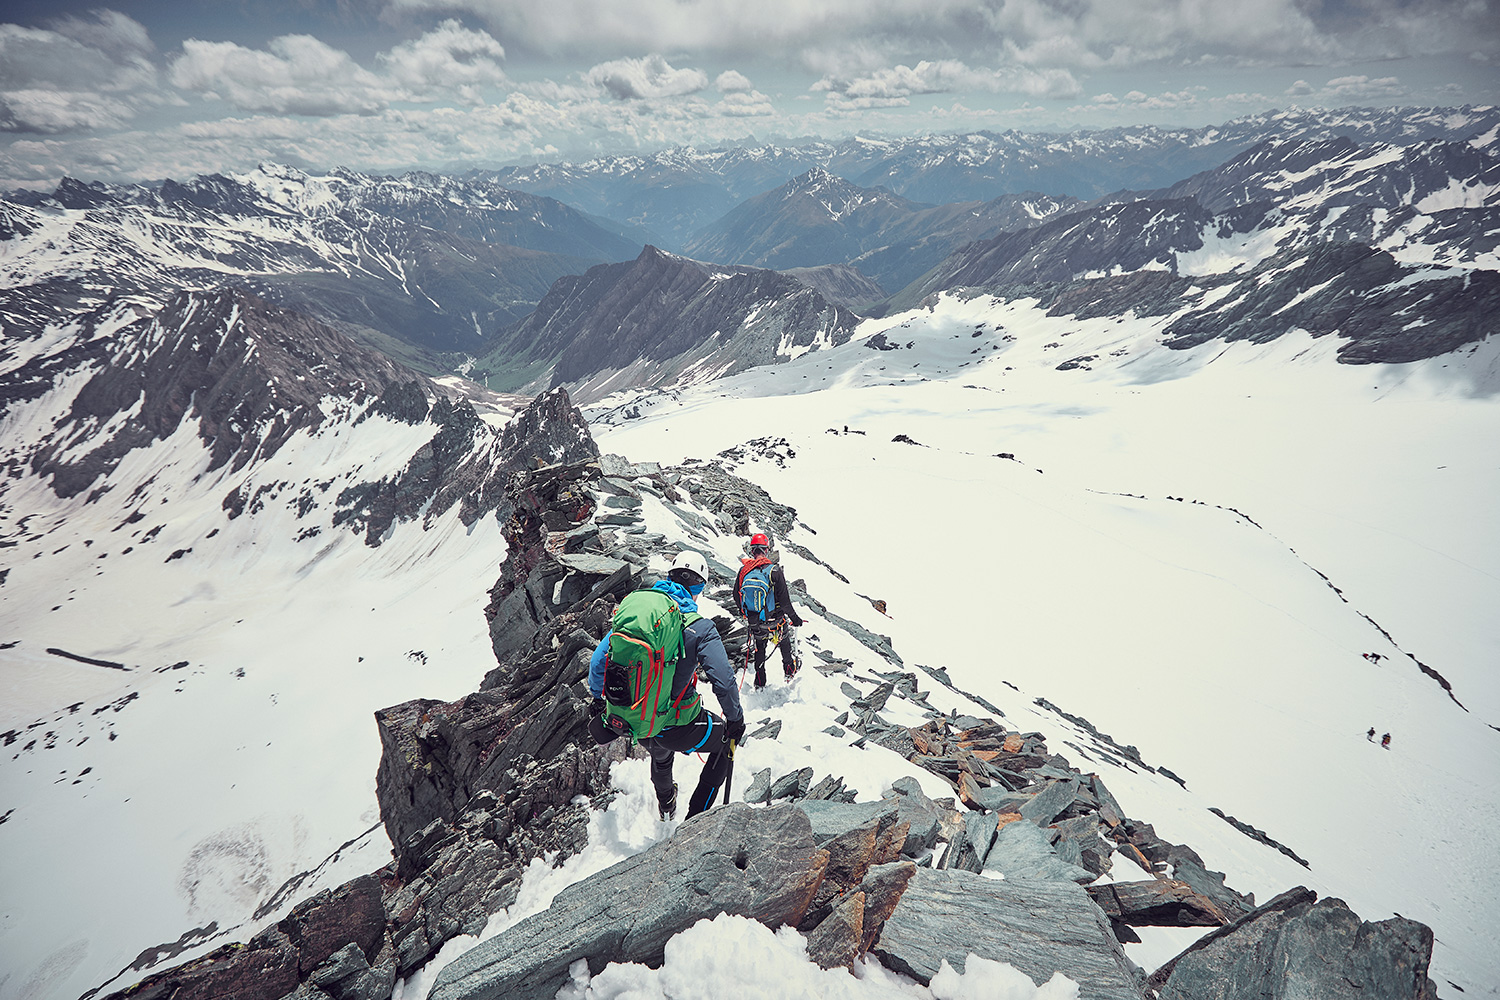 Two mounaineers on ropes making their way down from the Grossglockner Summit